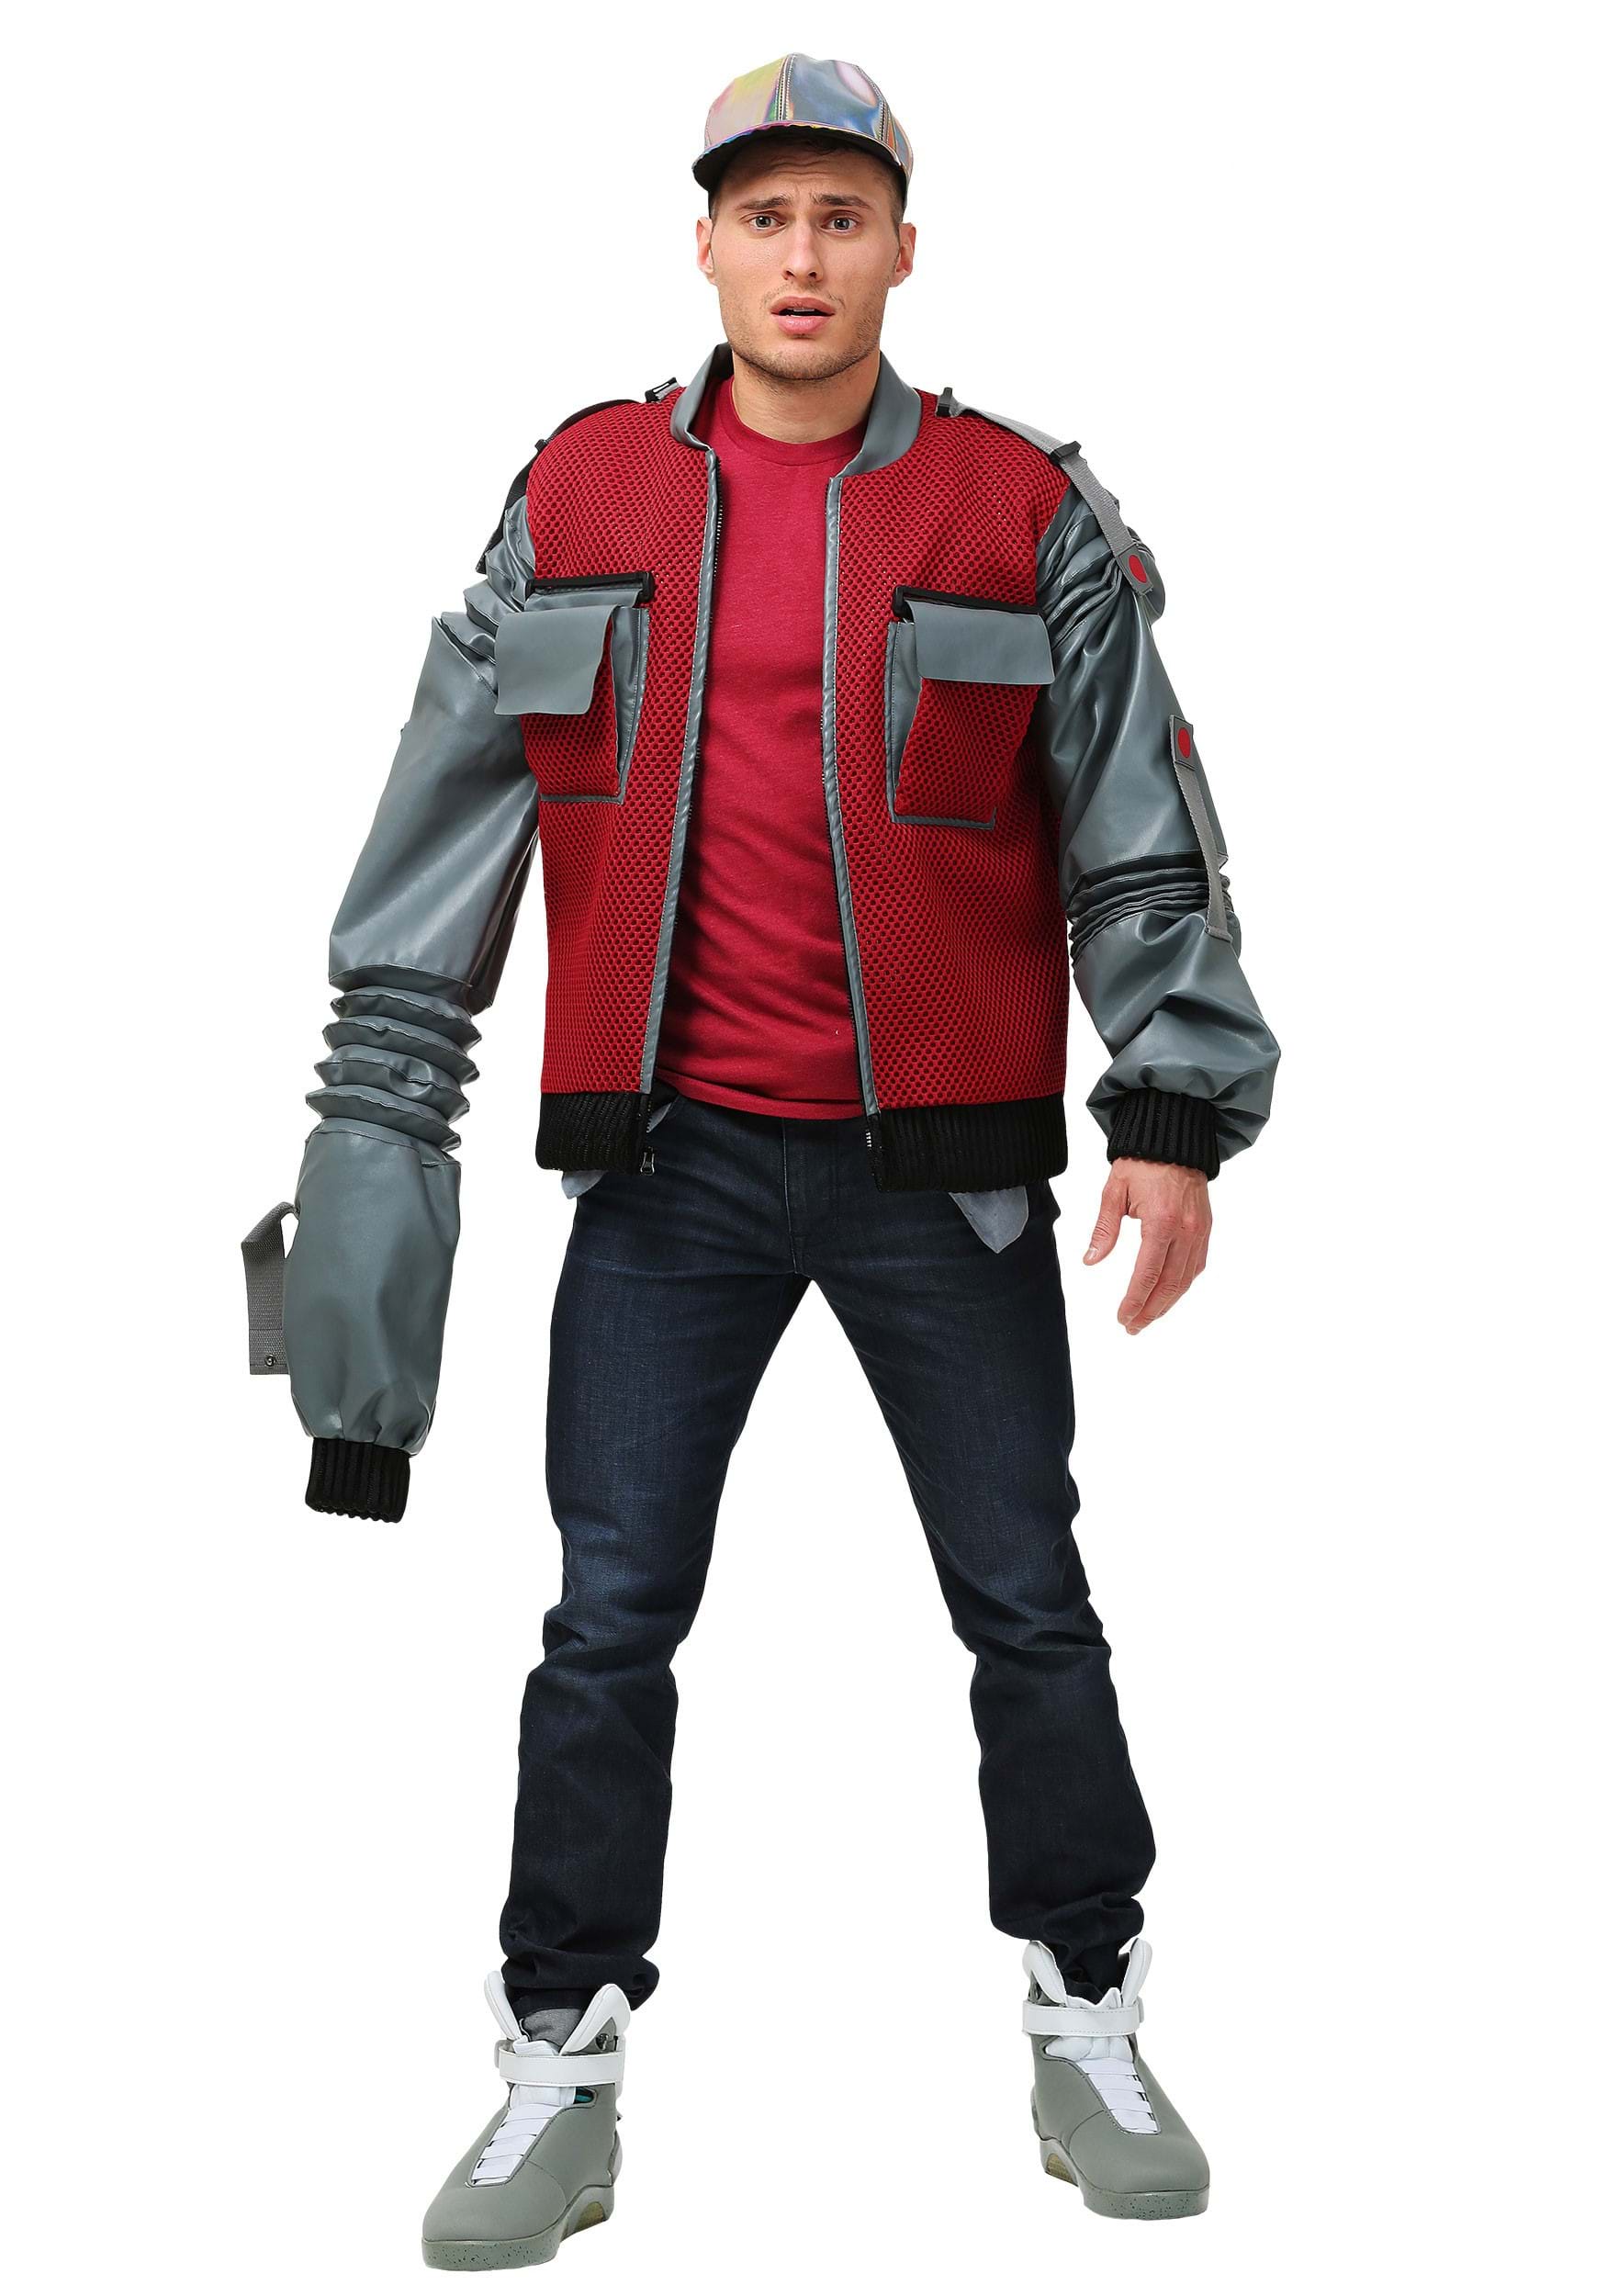 Photos - Fancy Dress FUN Costumes Men's Authentic Marty McFly Jacket Costume from Back to the F